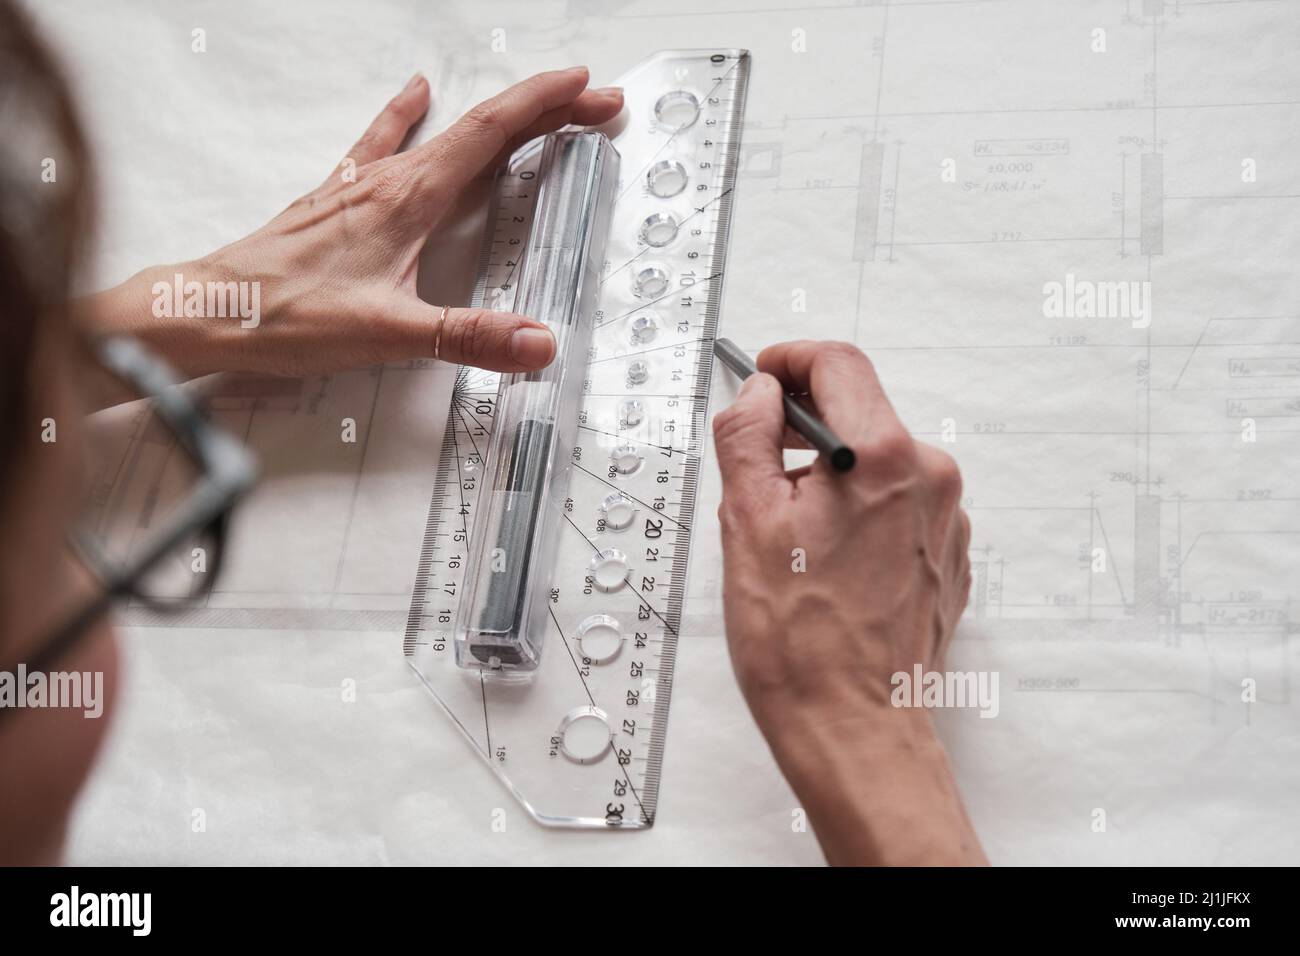 Over shoulder view of female architect or engineer drawing blueprint using ruler and pencil Stock Photo